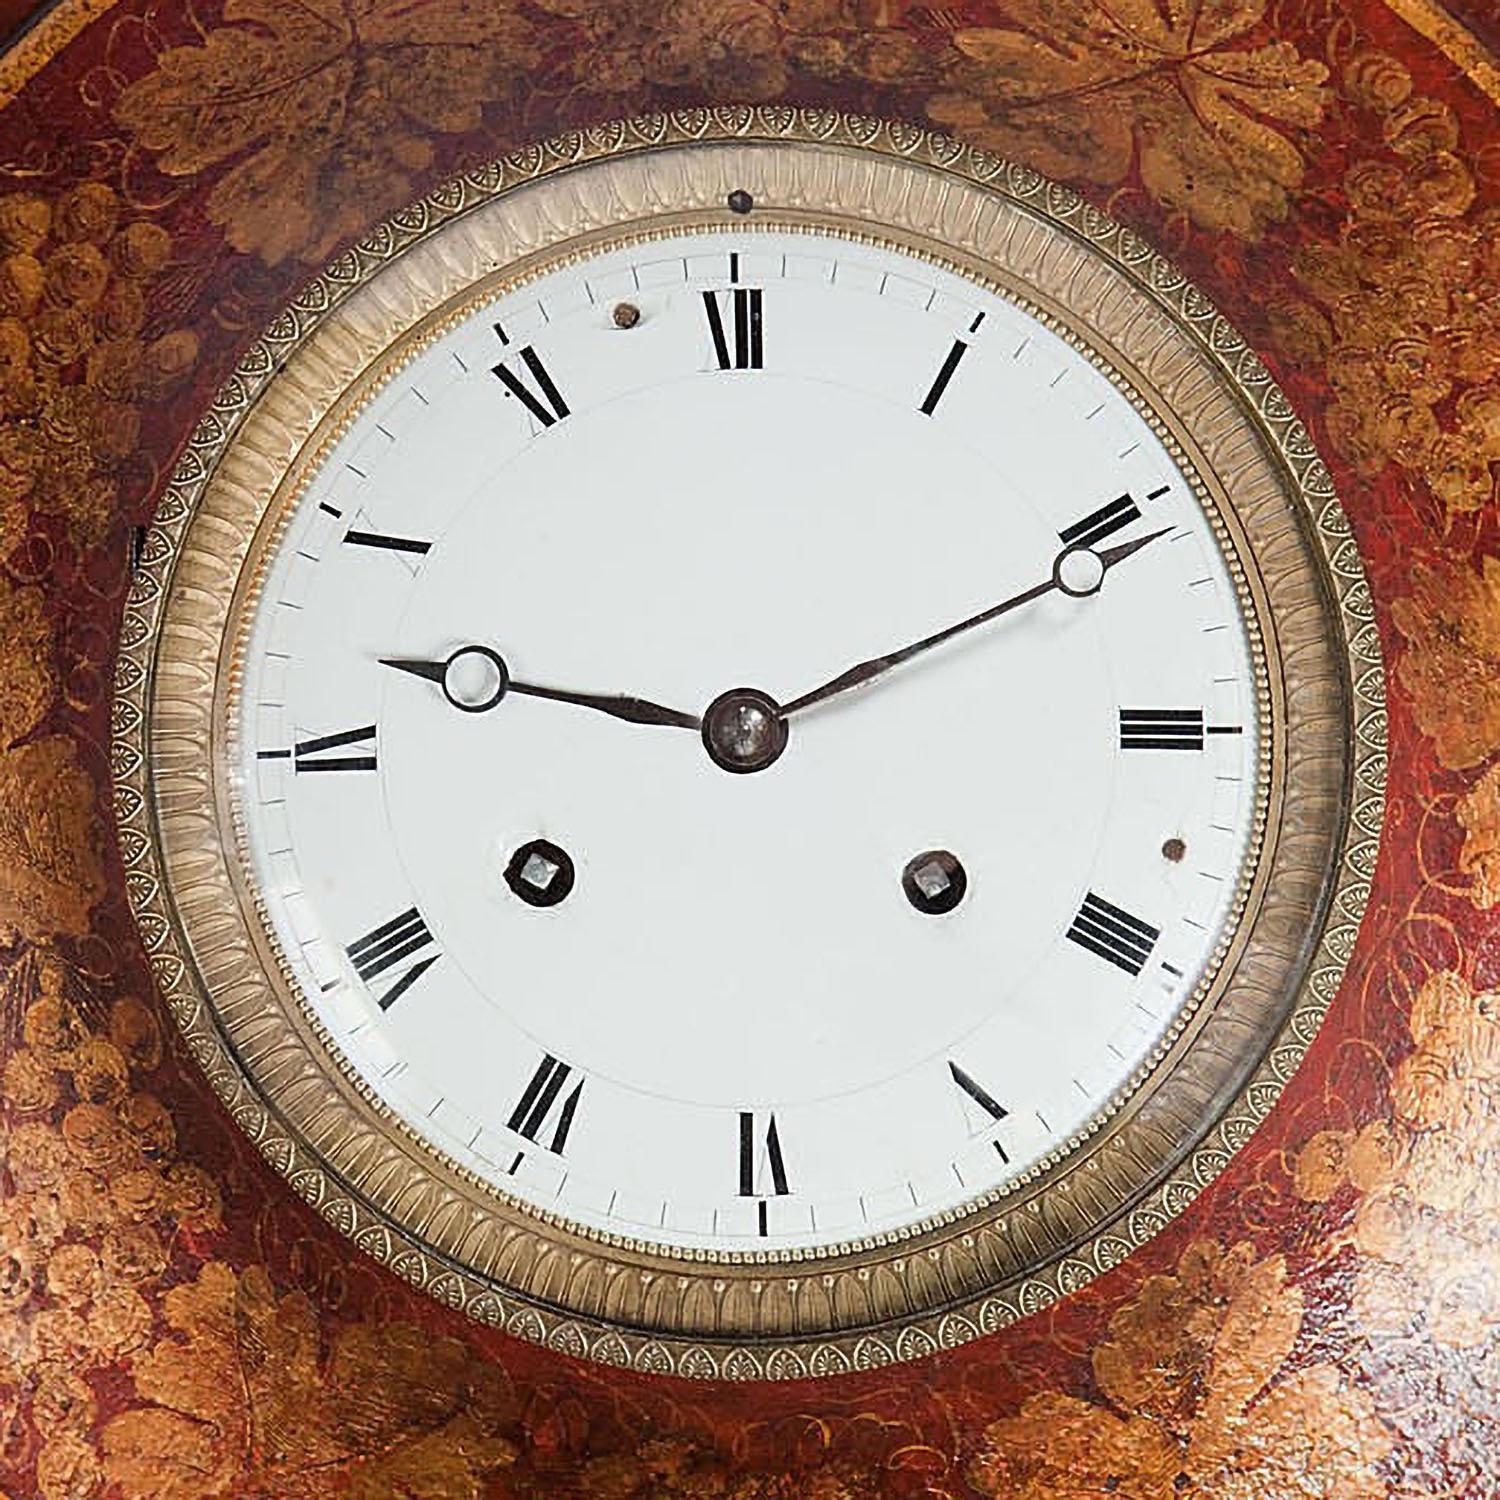 A very fine early 19th century Tole wall clock, the circular bullseye shape with a central white enameled dial within a gilt bronze mount. The clock body finished in red japanning and detailed in gilt. Suspended from a brass ring handle.

France,